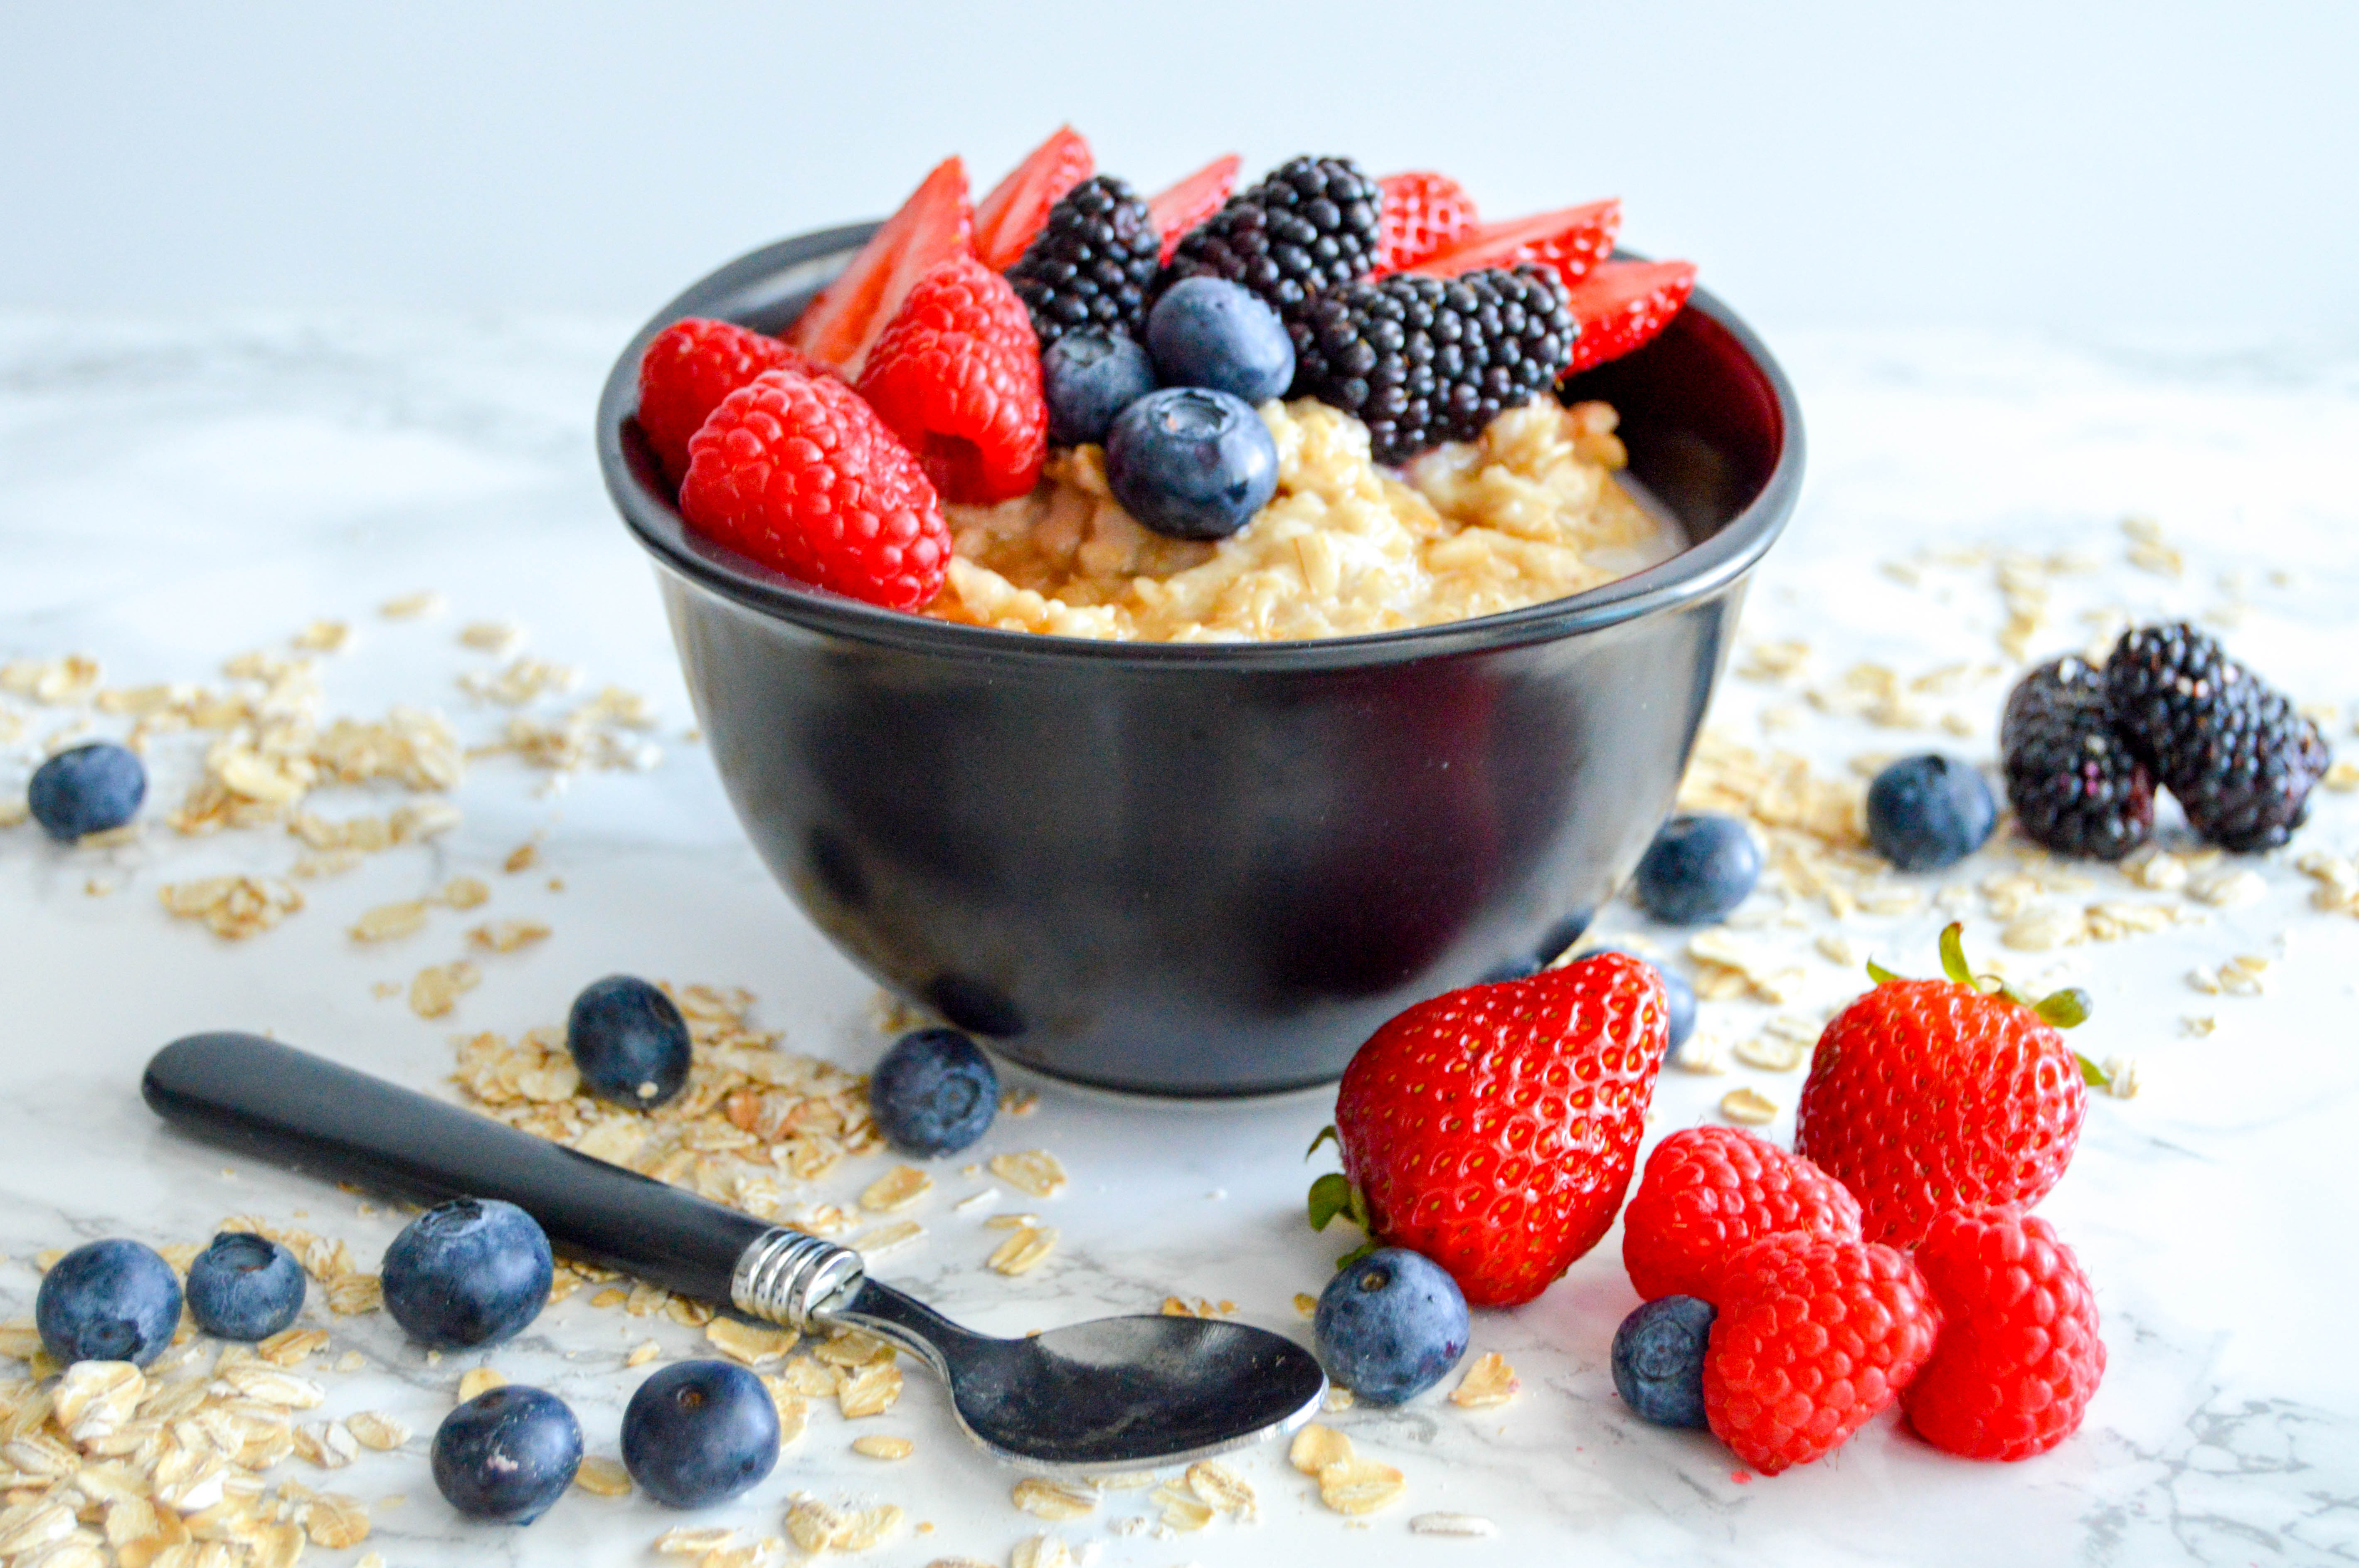 Oatmeal breakfast recipe for a fiber filled food idea. How to relieve occasional constipation with fiber packed foods and MiraLAX. Delicious, cheap, easy.